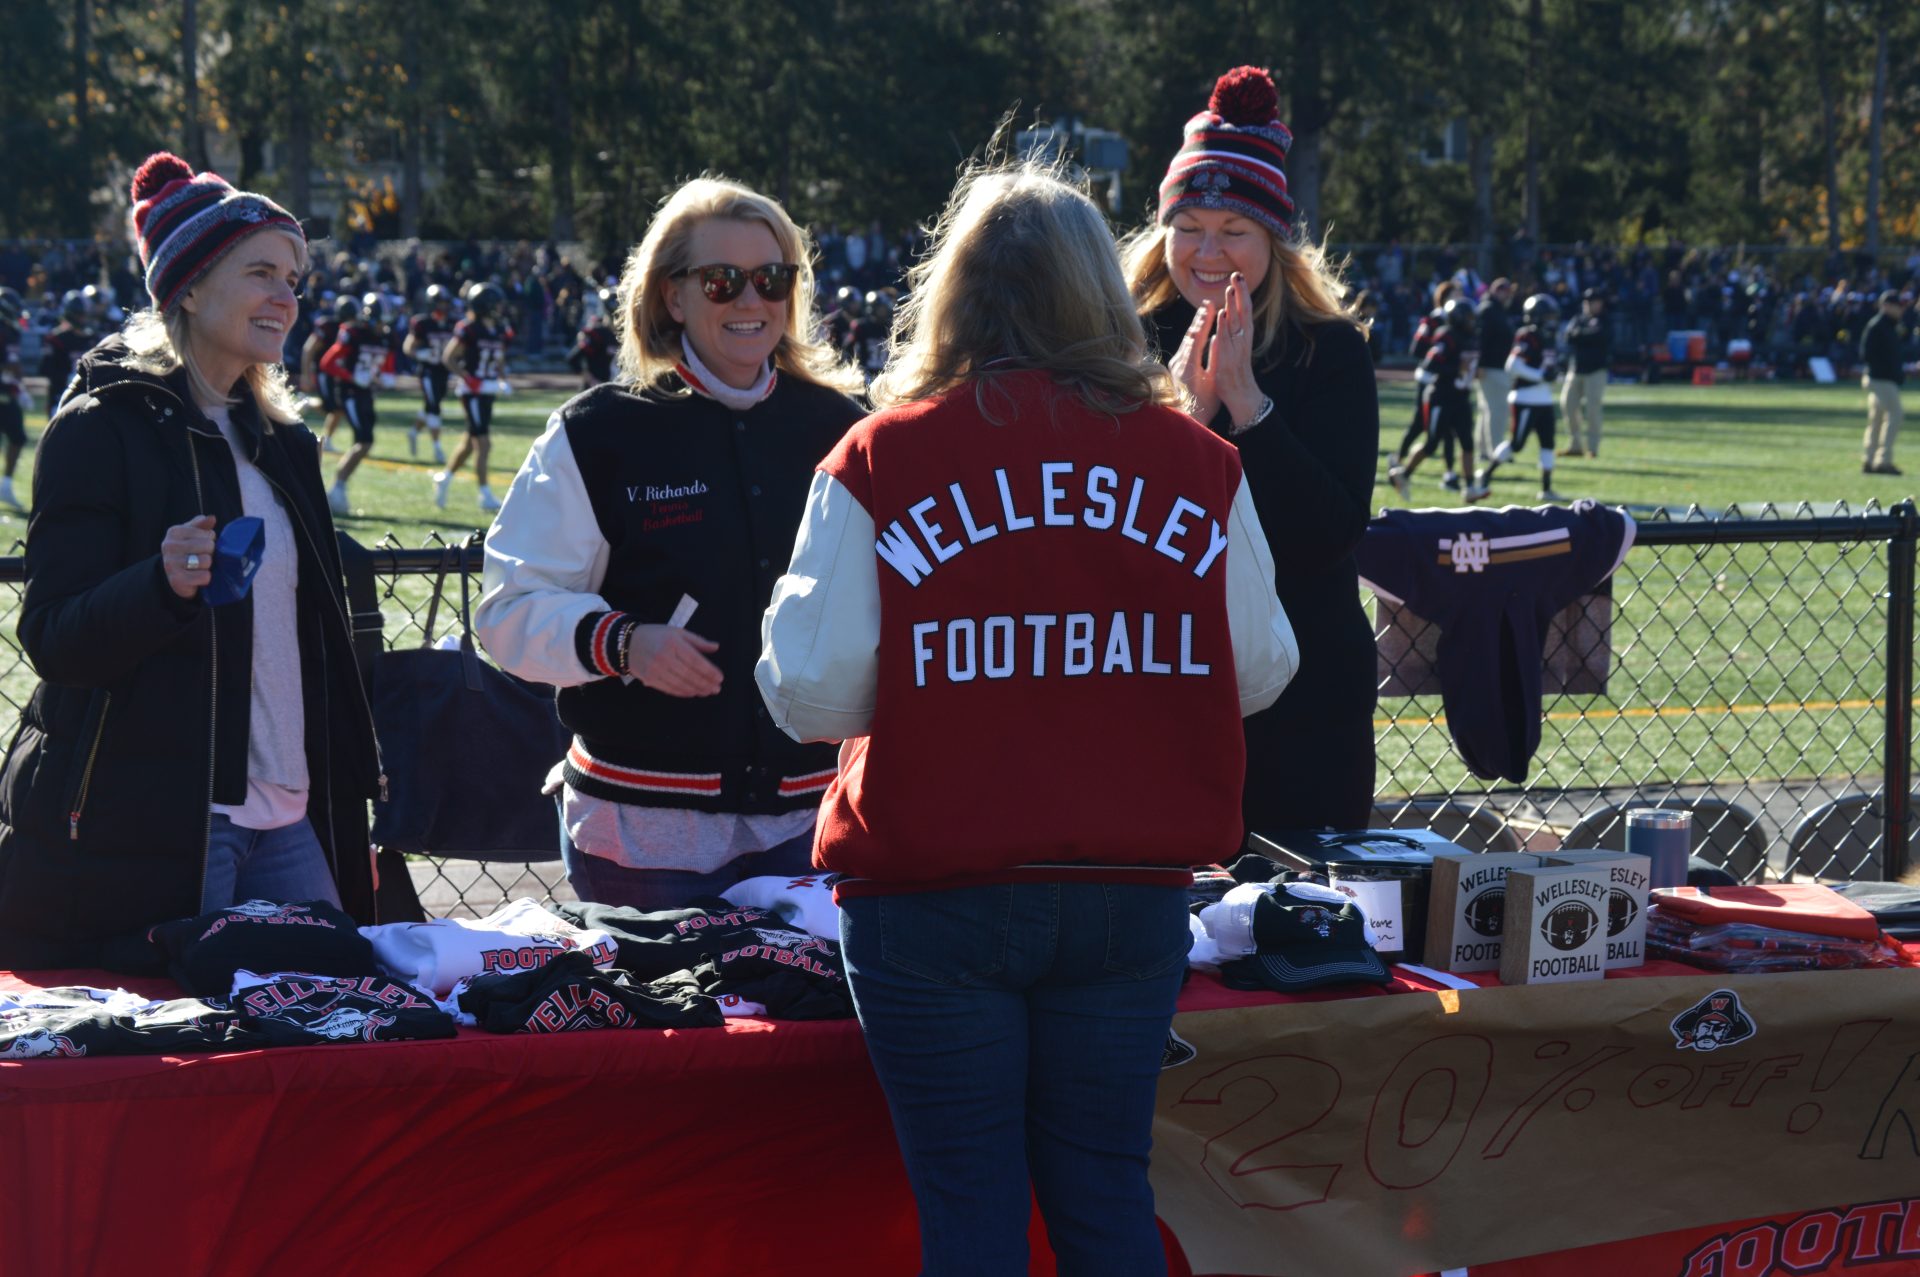 Wellesley Rotary hosts Raiders & Rockets before Thanksgiving football game  - The Swellesley Report